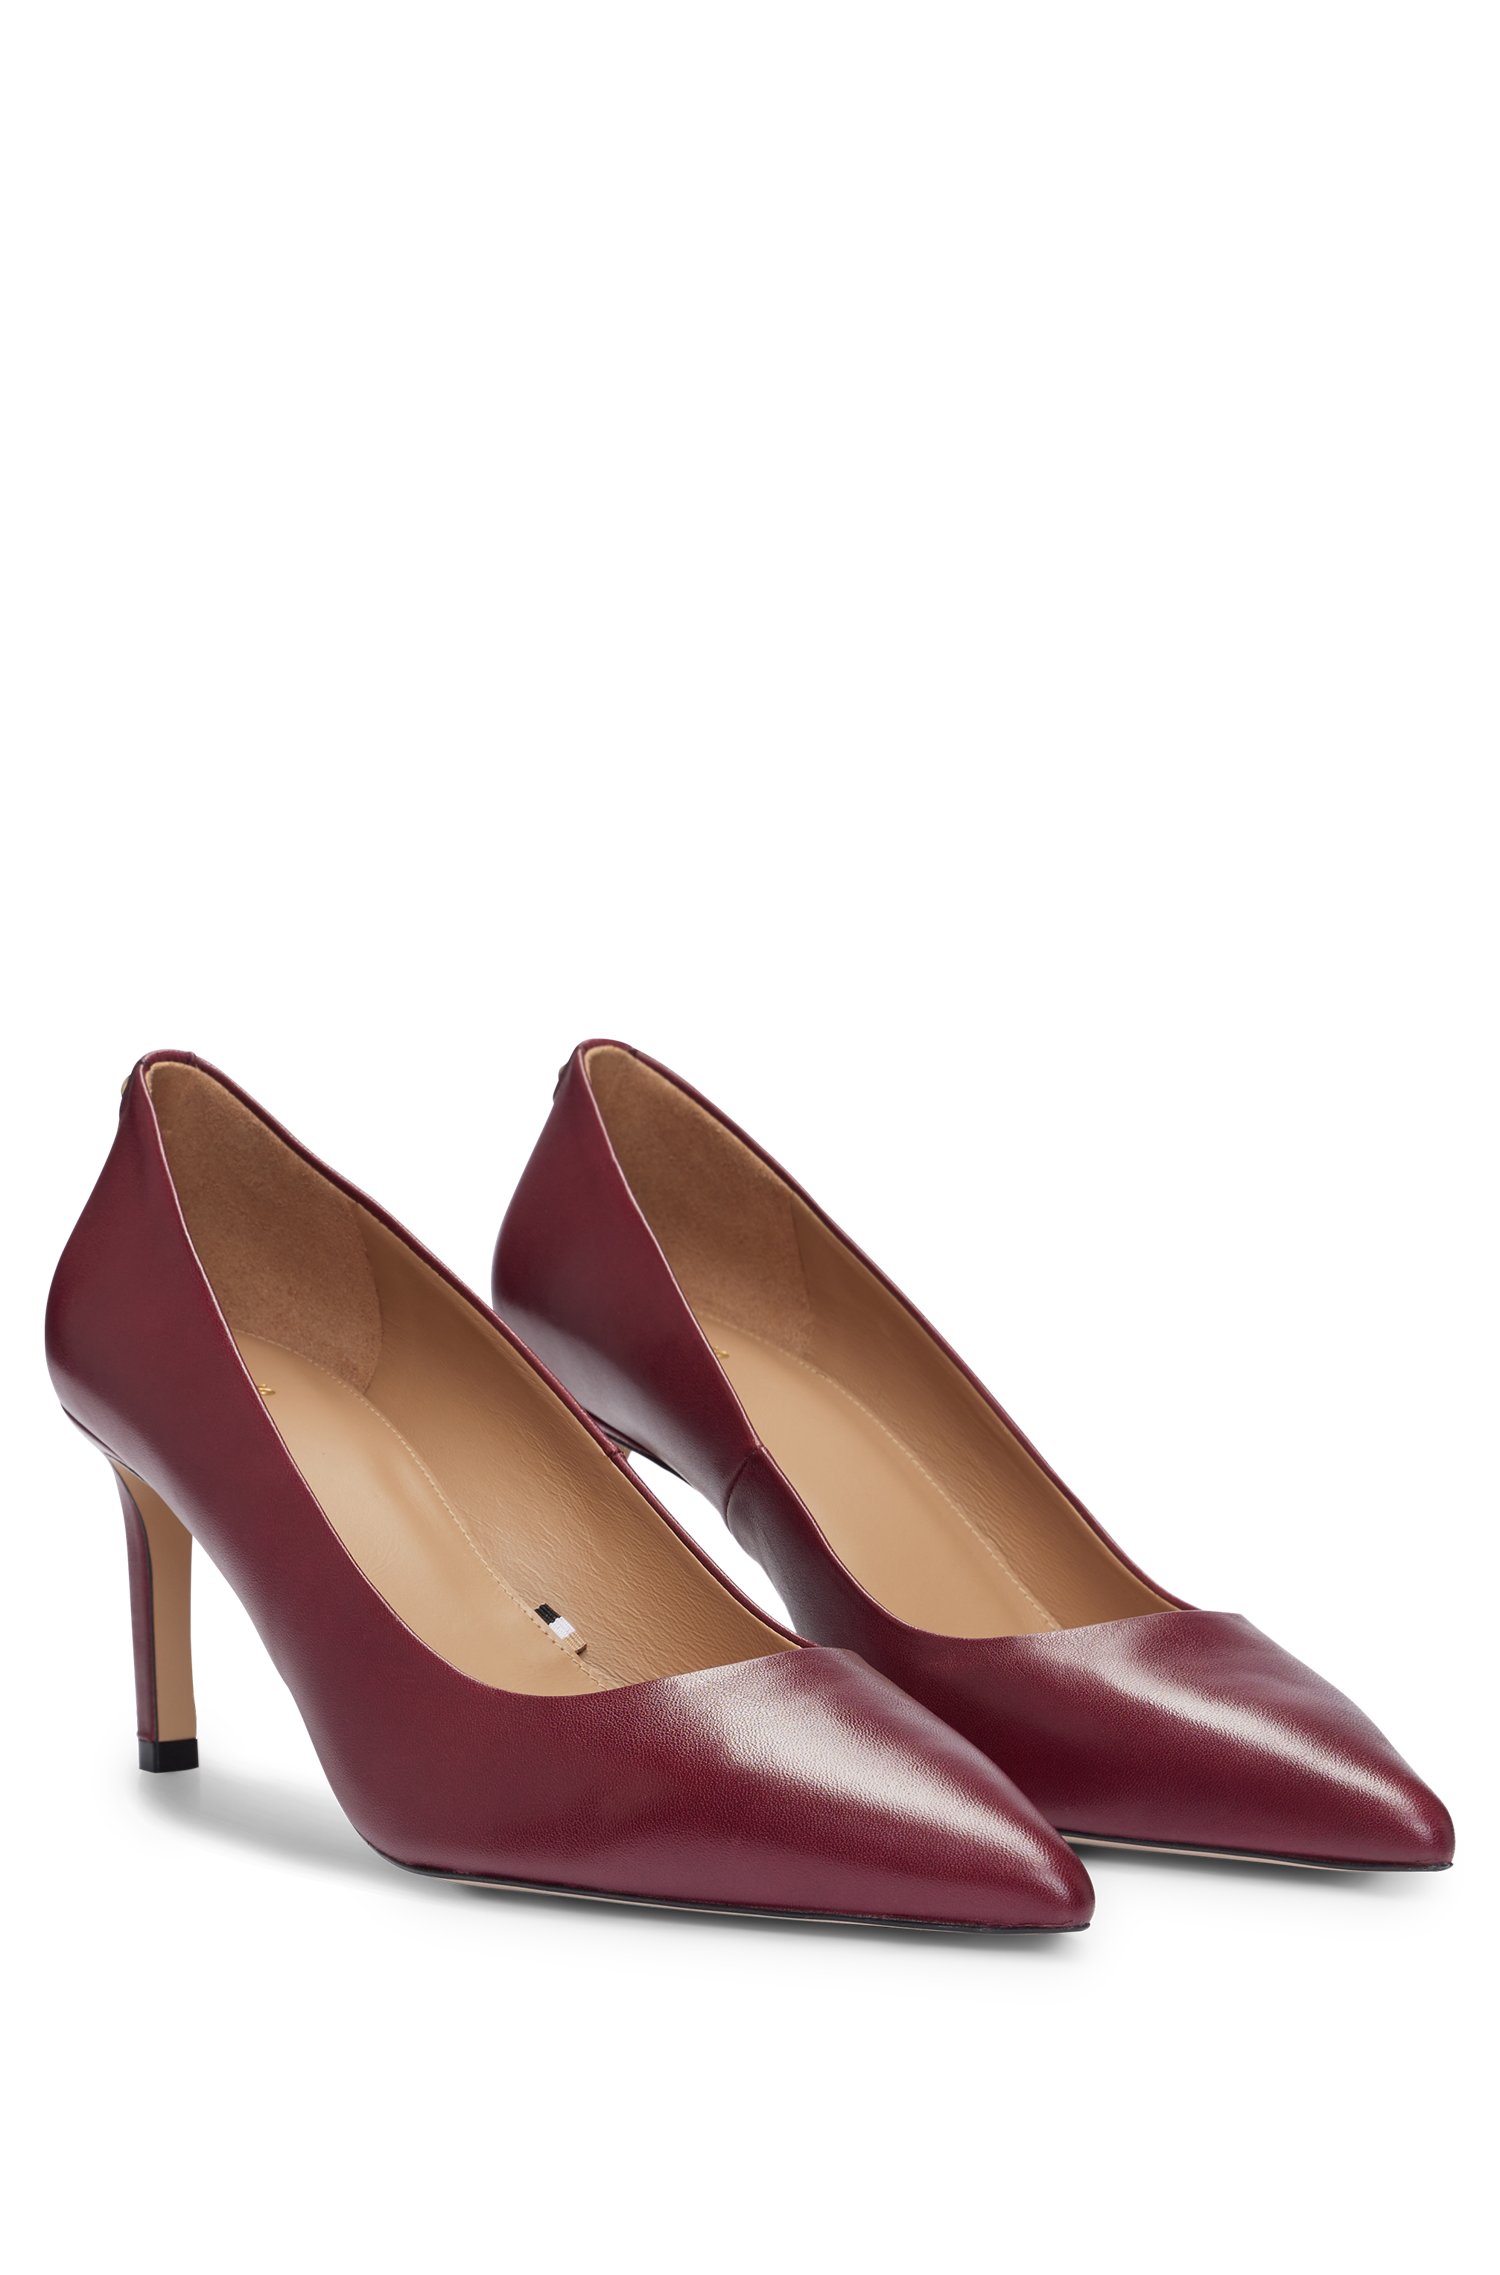 Nappa-leather pumps with 7cm heel